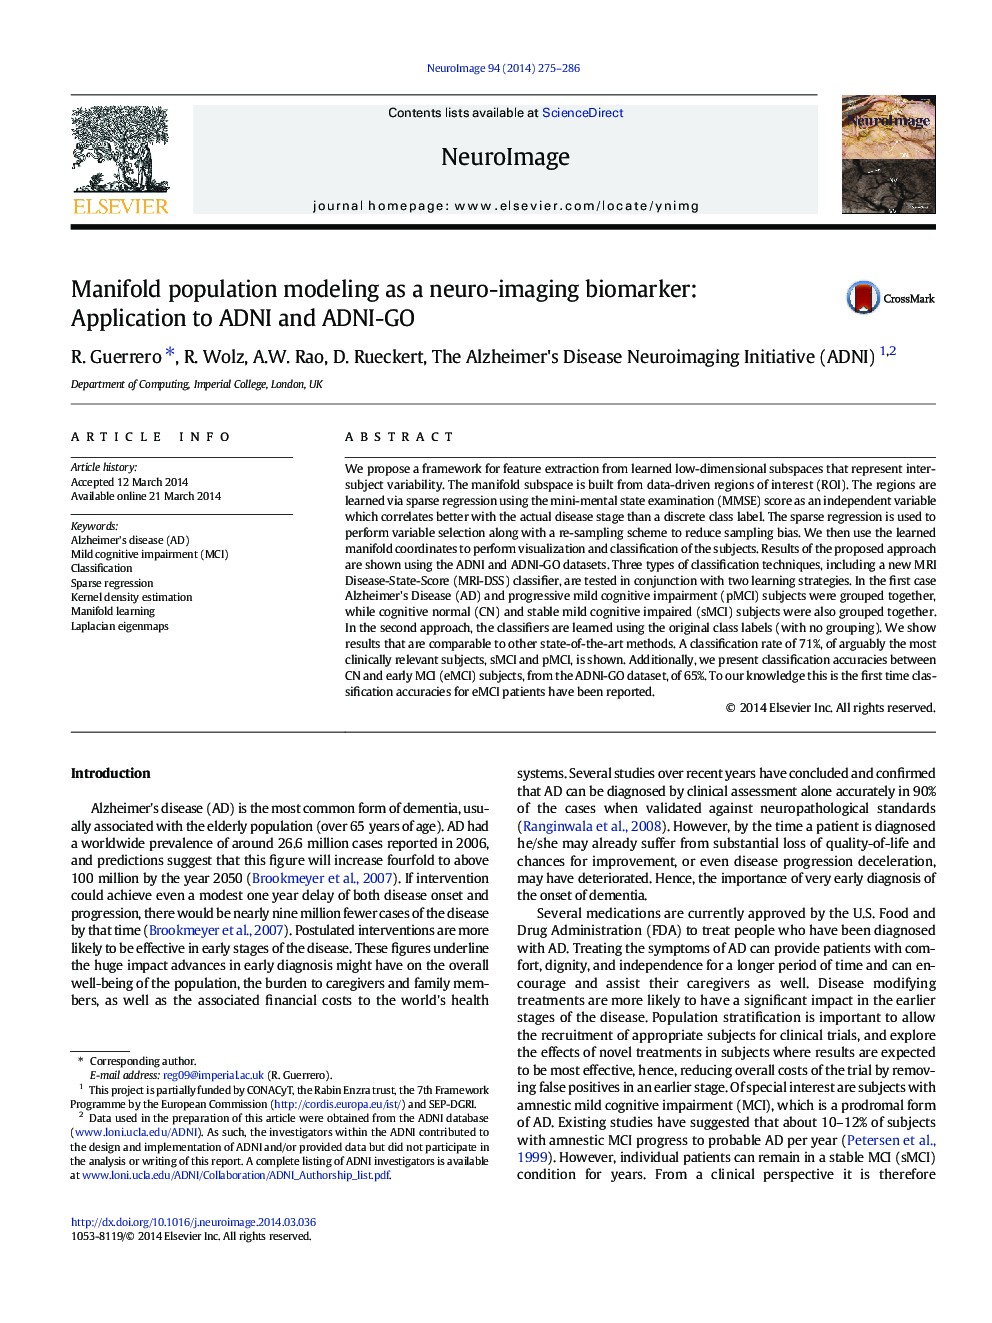 Manifold population modeling as a neuro-imaging biomarker: Application to ADNI and ADNI-GO